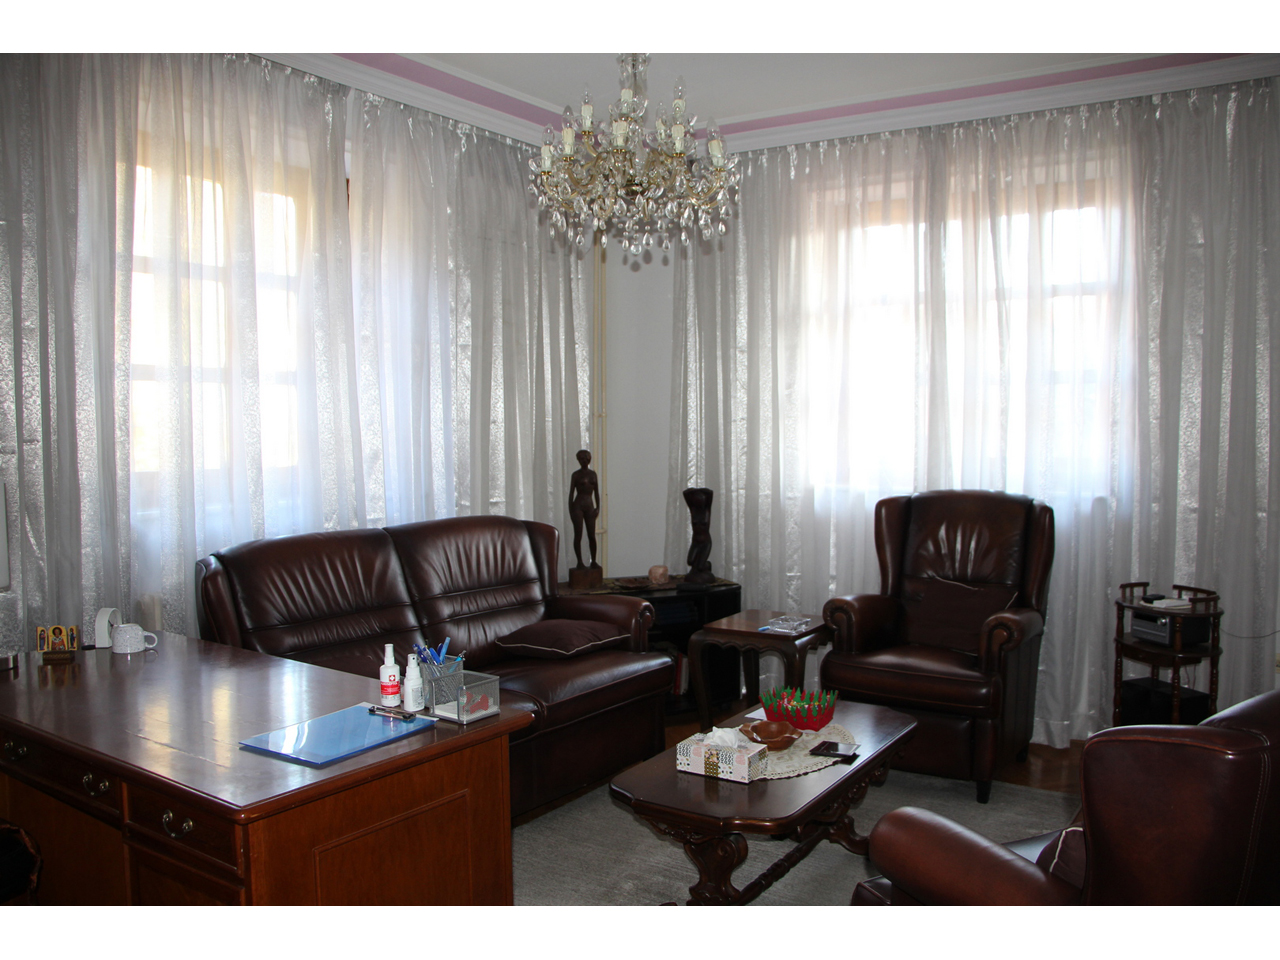 EPISTEMA PSYCHIATRY AND PSYCHOTHERAPY MEDICAL OFFICE Psychotherapists, psychotherapy Belgrade - Photo 7